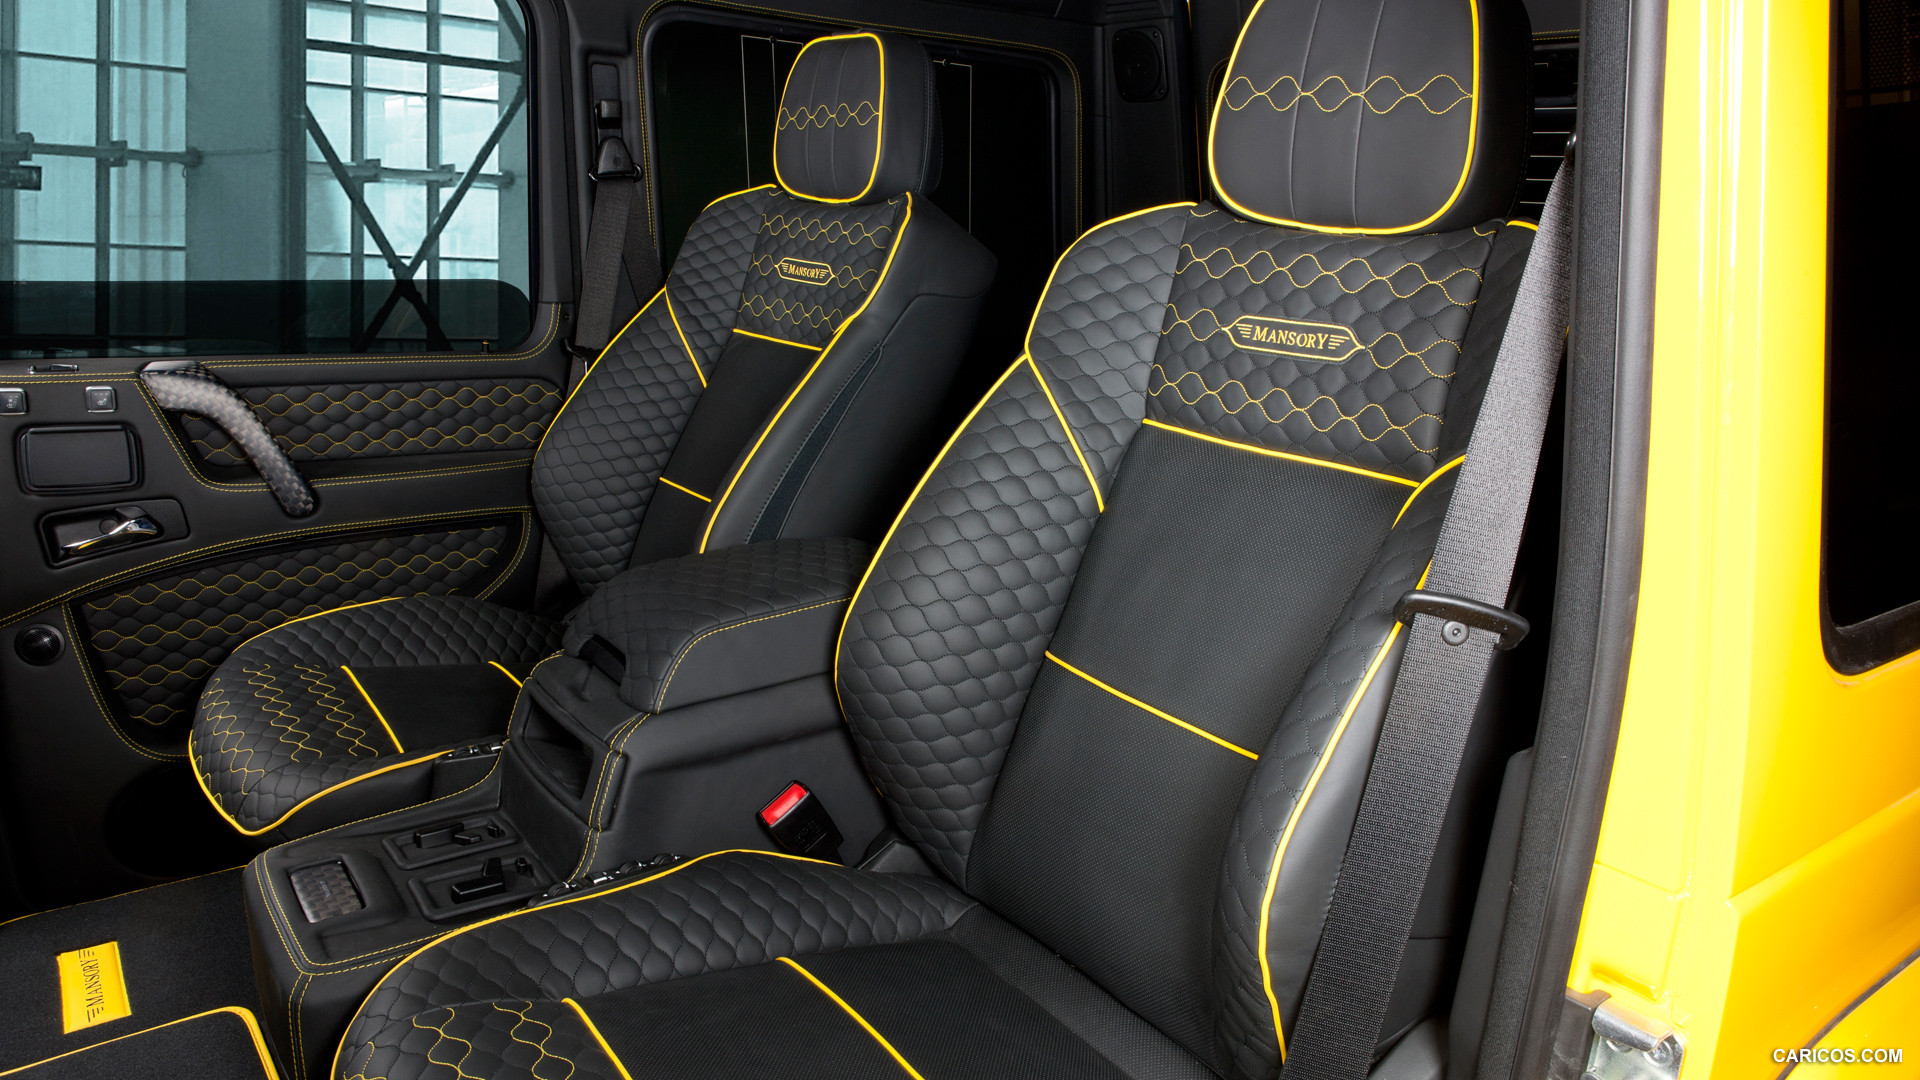 2013 Mansory Gronos based on Mercedes-Benz G-Class AMG  - Interior, #6 of 7